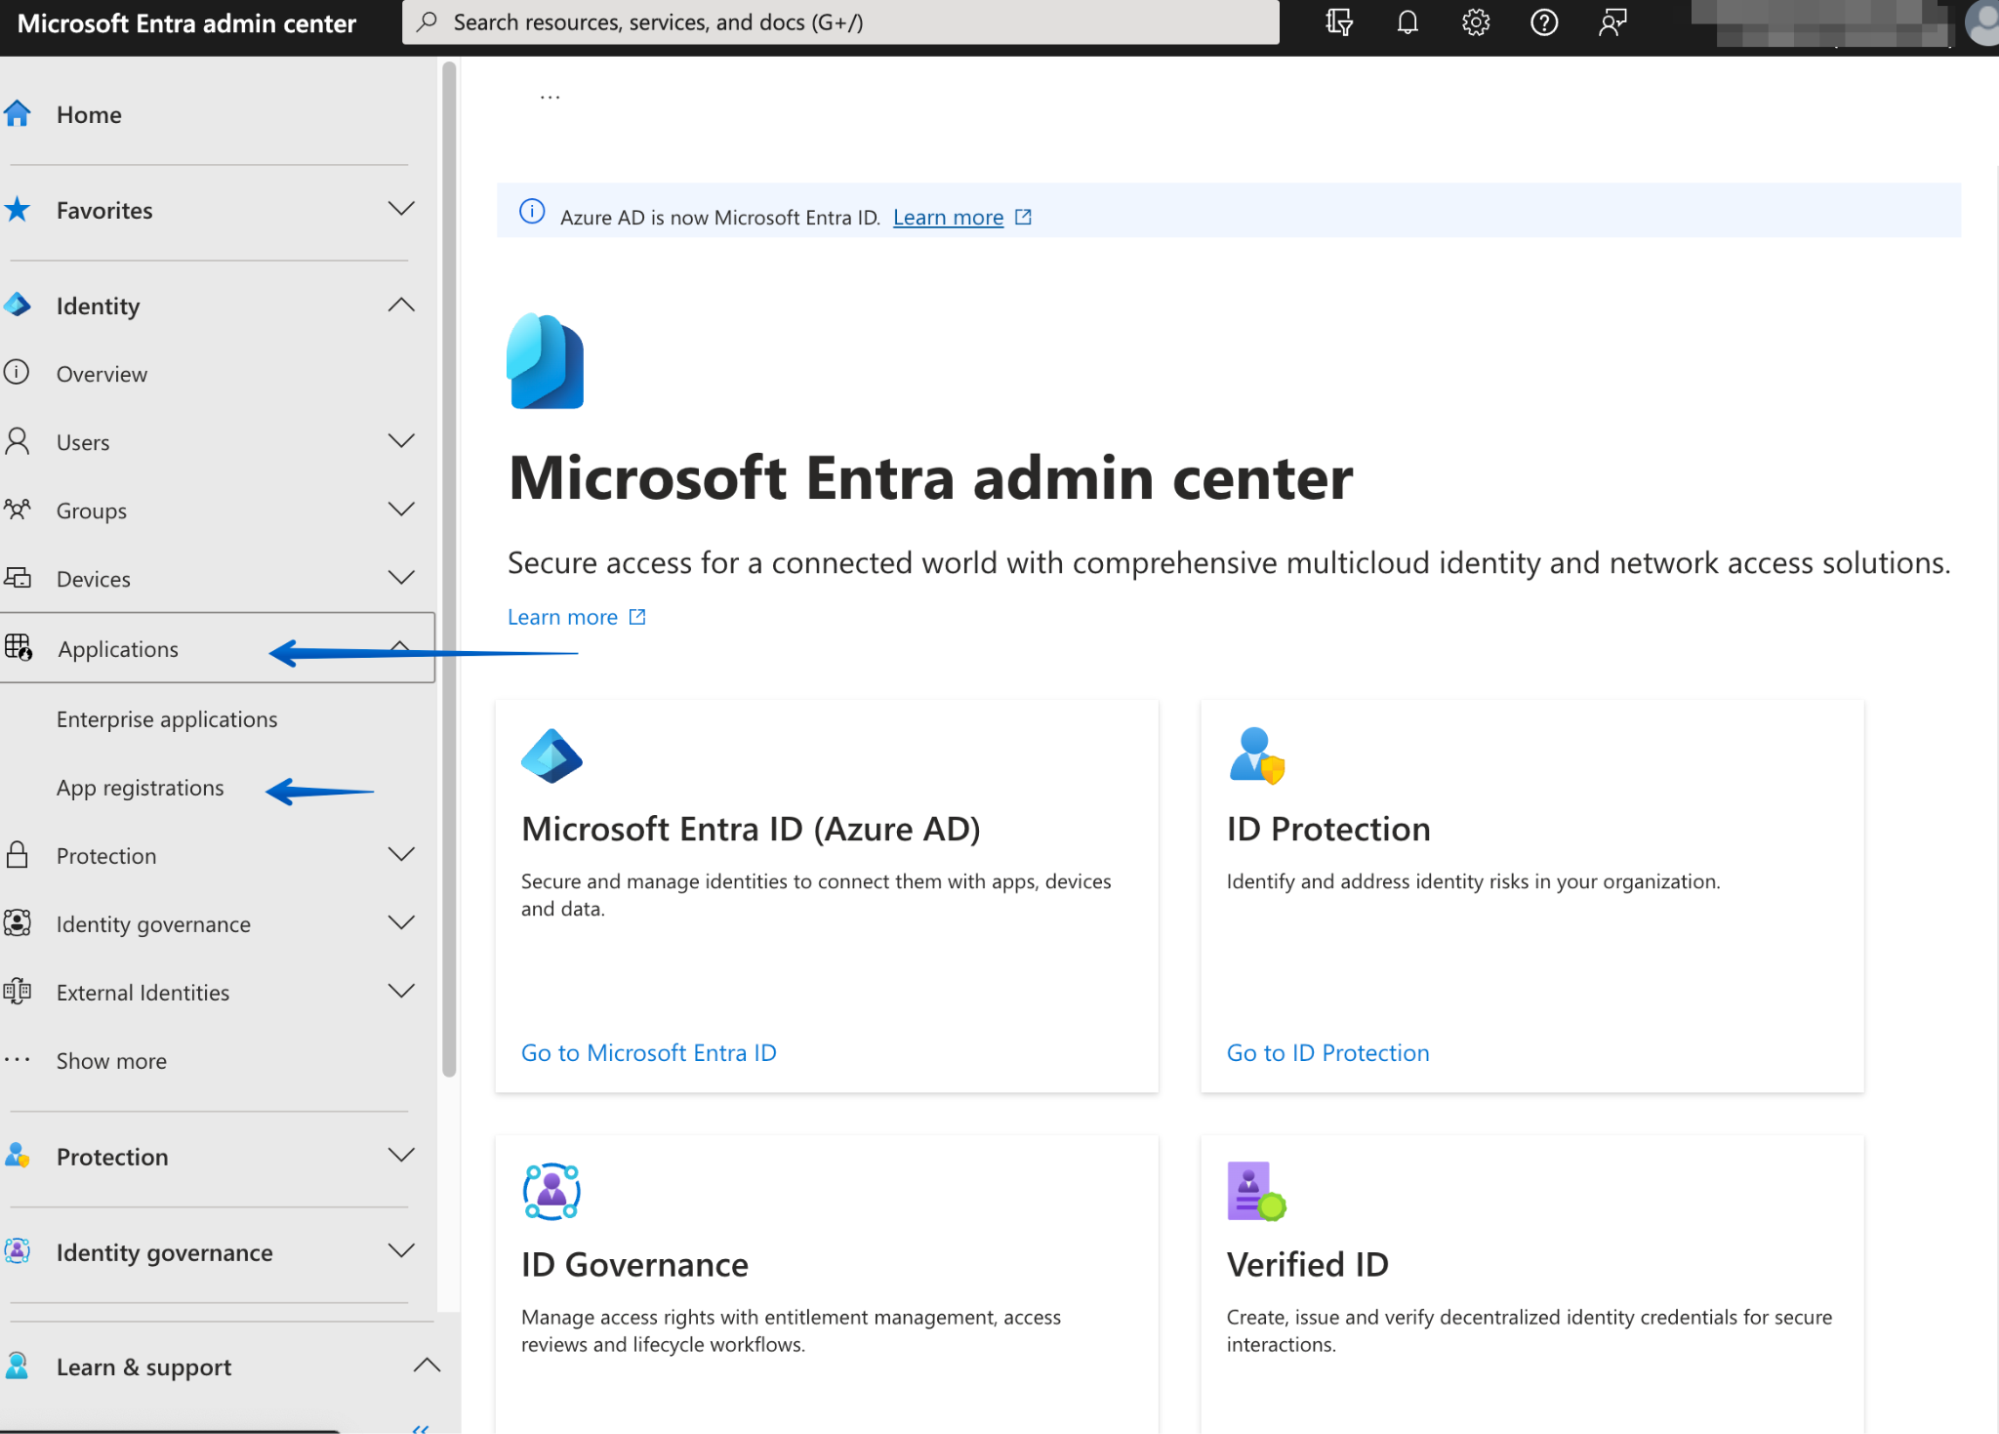 Selecting App Registrations in Microsoft Entra admin center